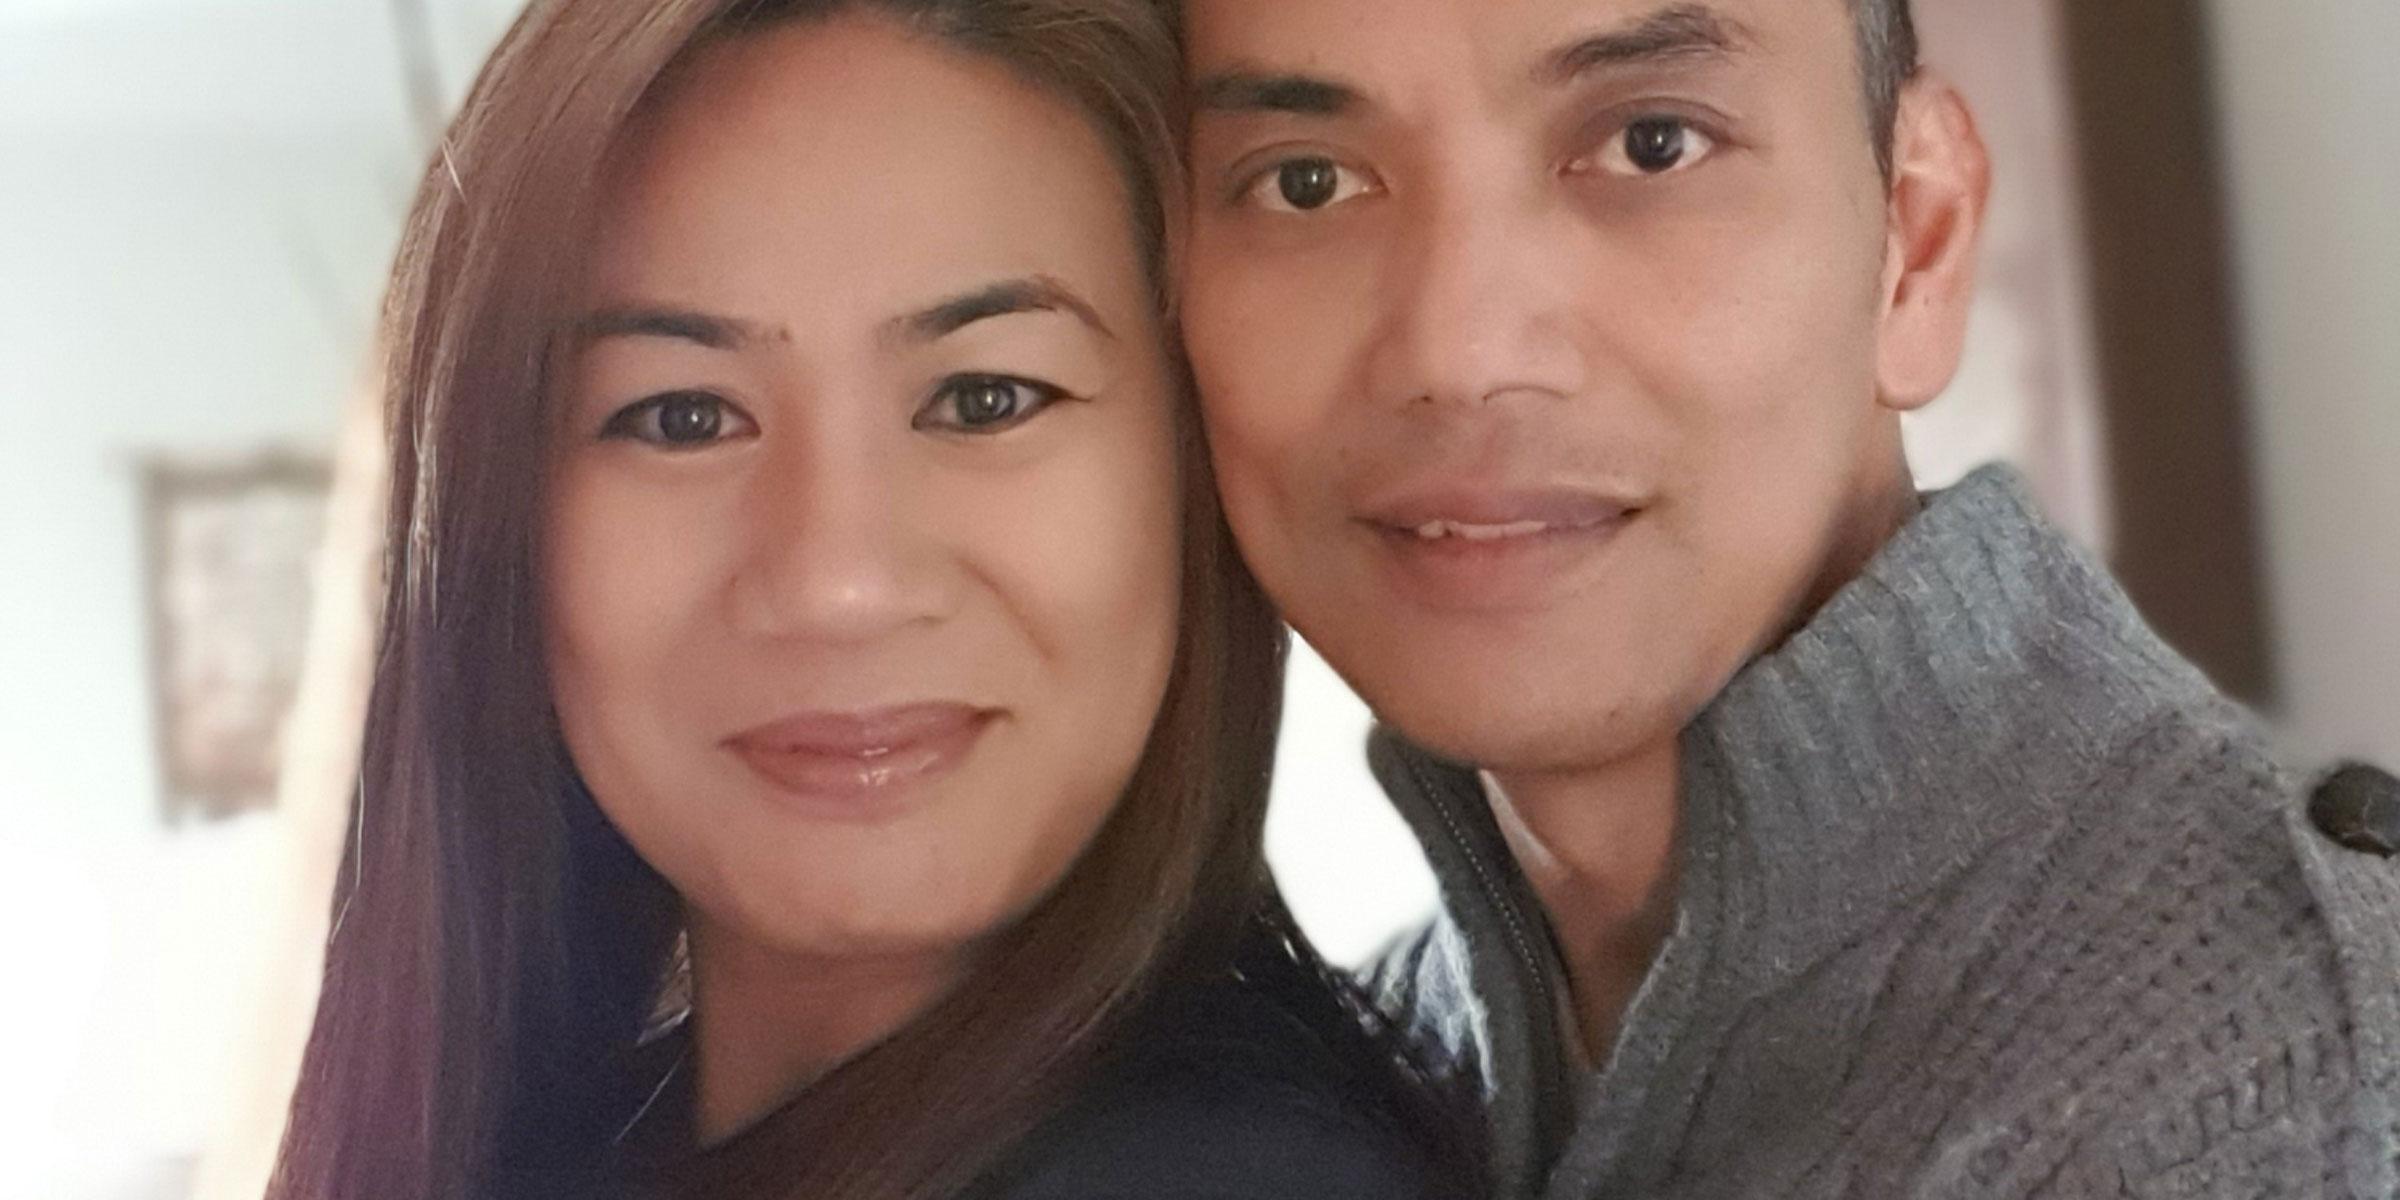 Michelle Macadangdang with her husband David